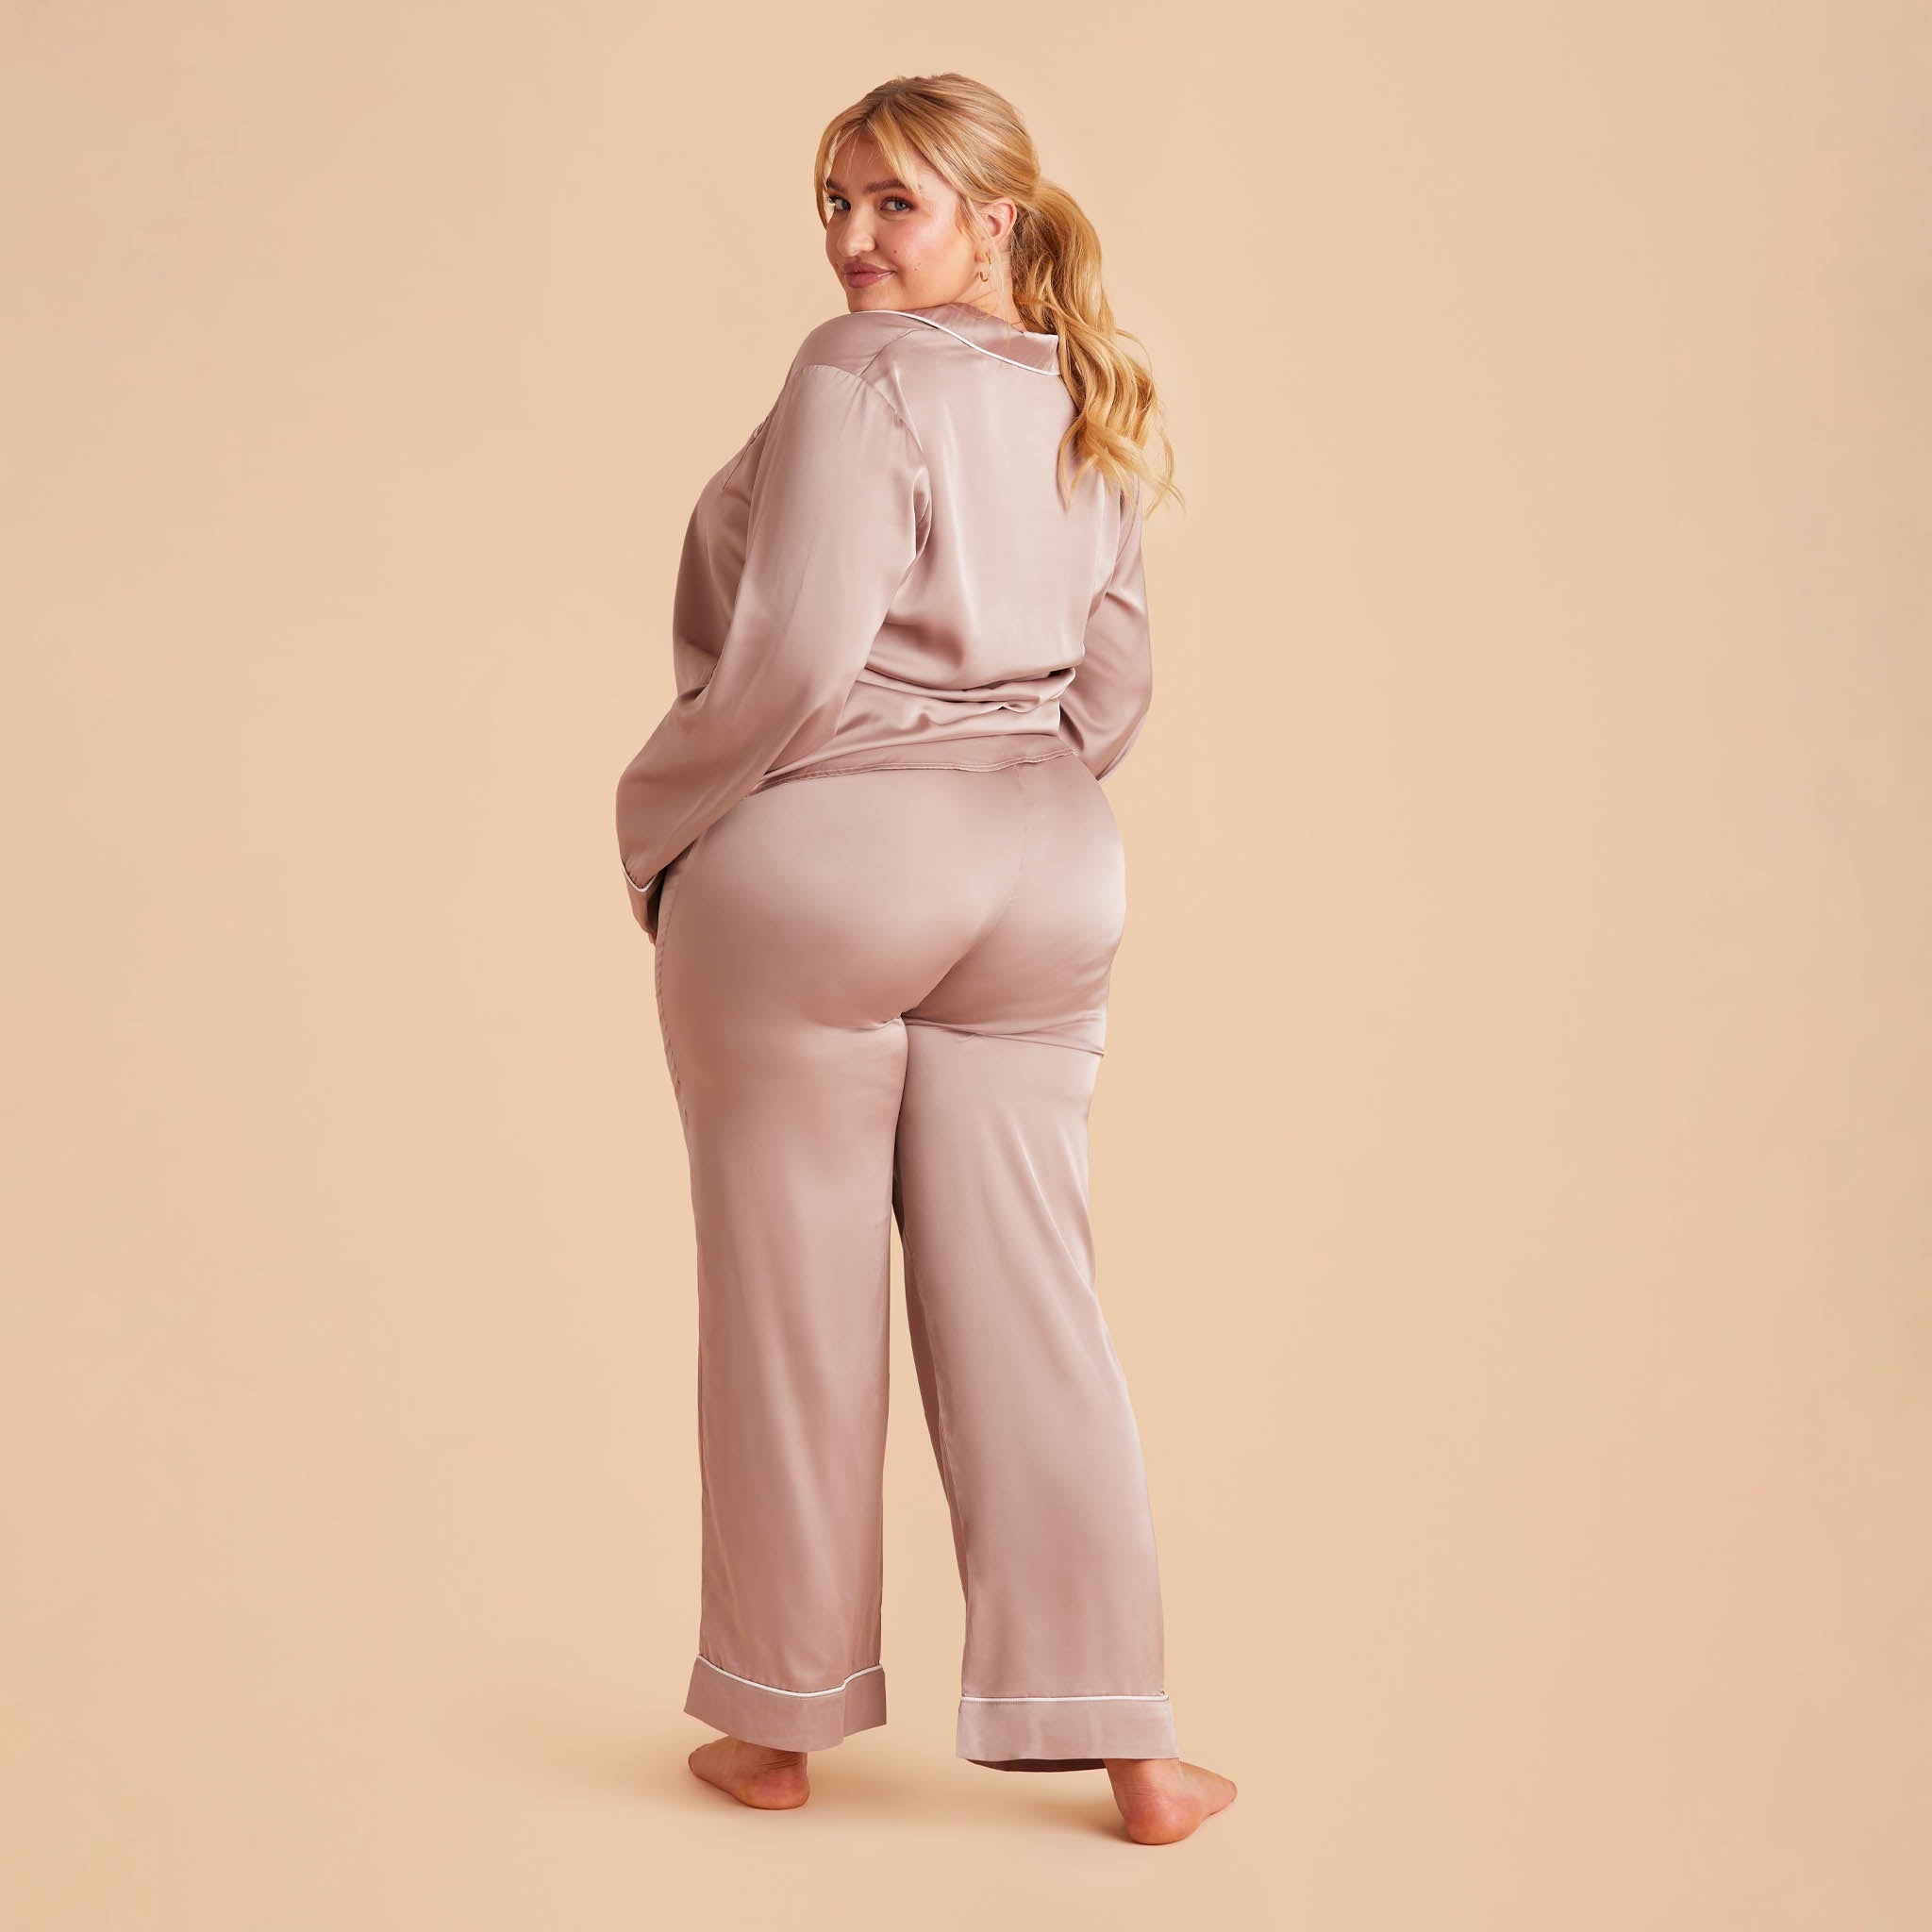 Jonny Plus Size Satin Long Sleeve Pajama Top With White Piping in mauve taupe, back view